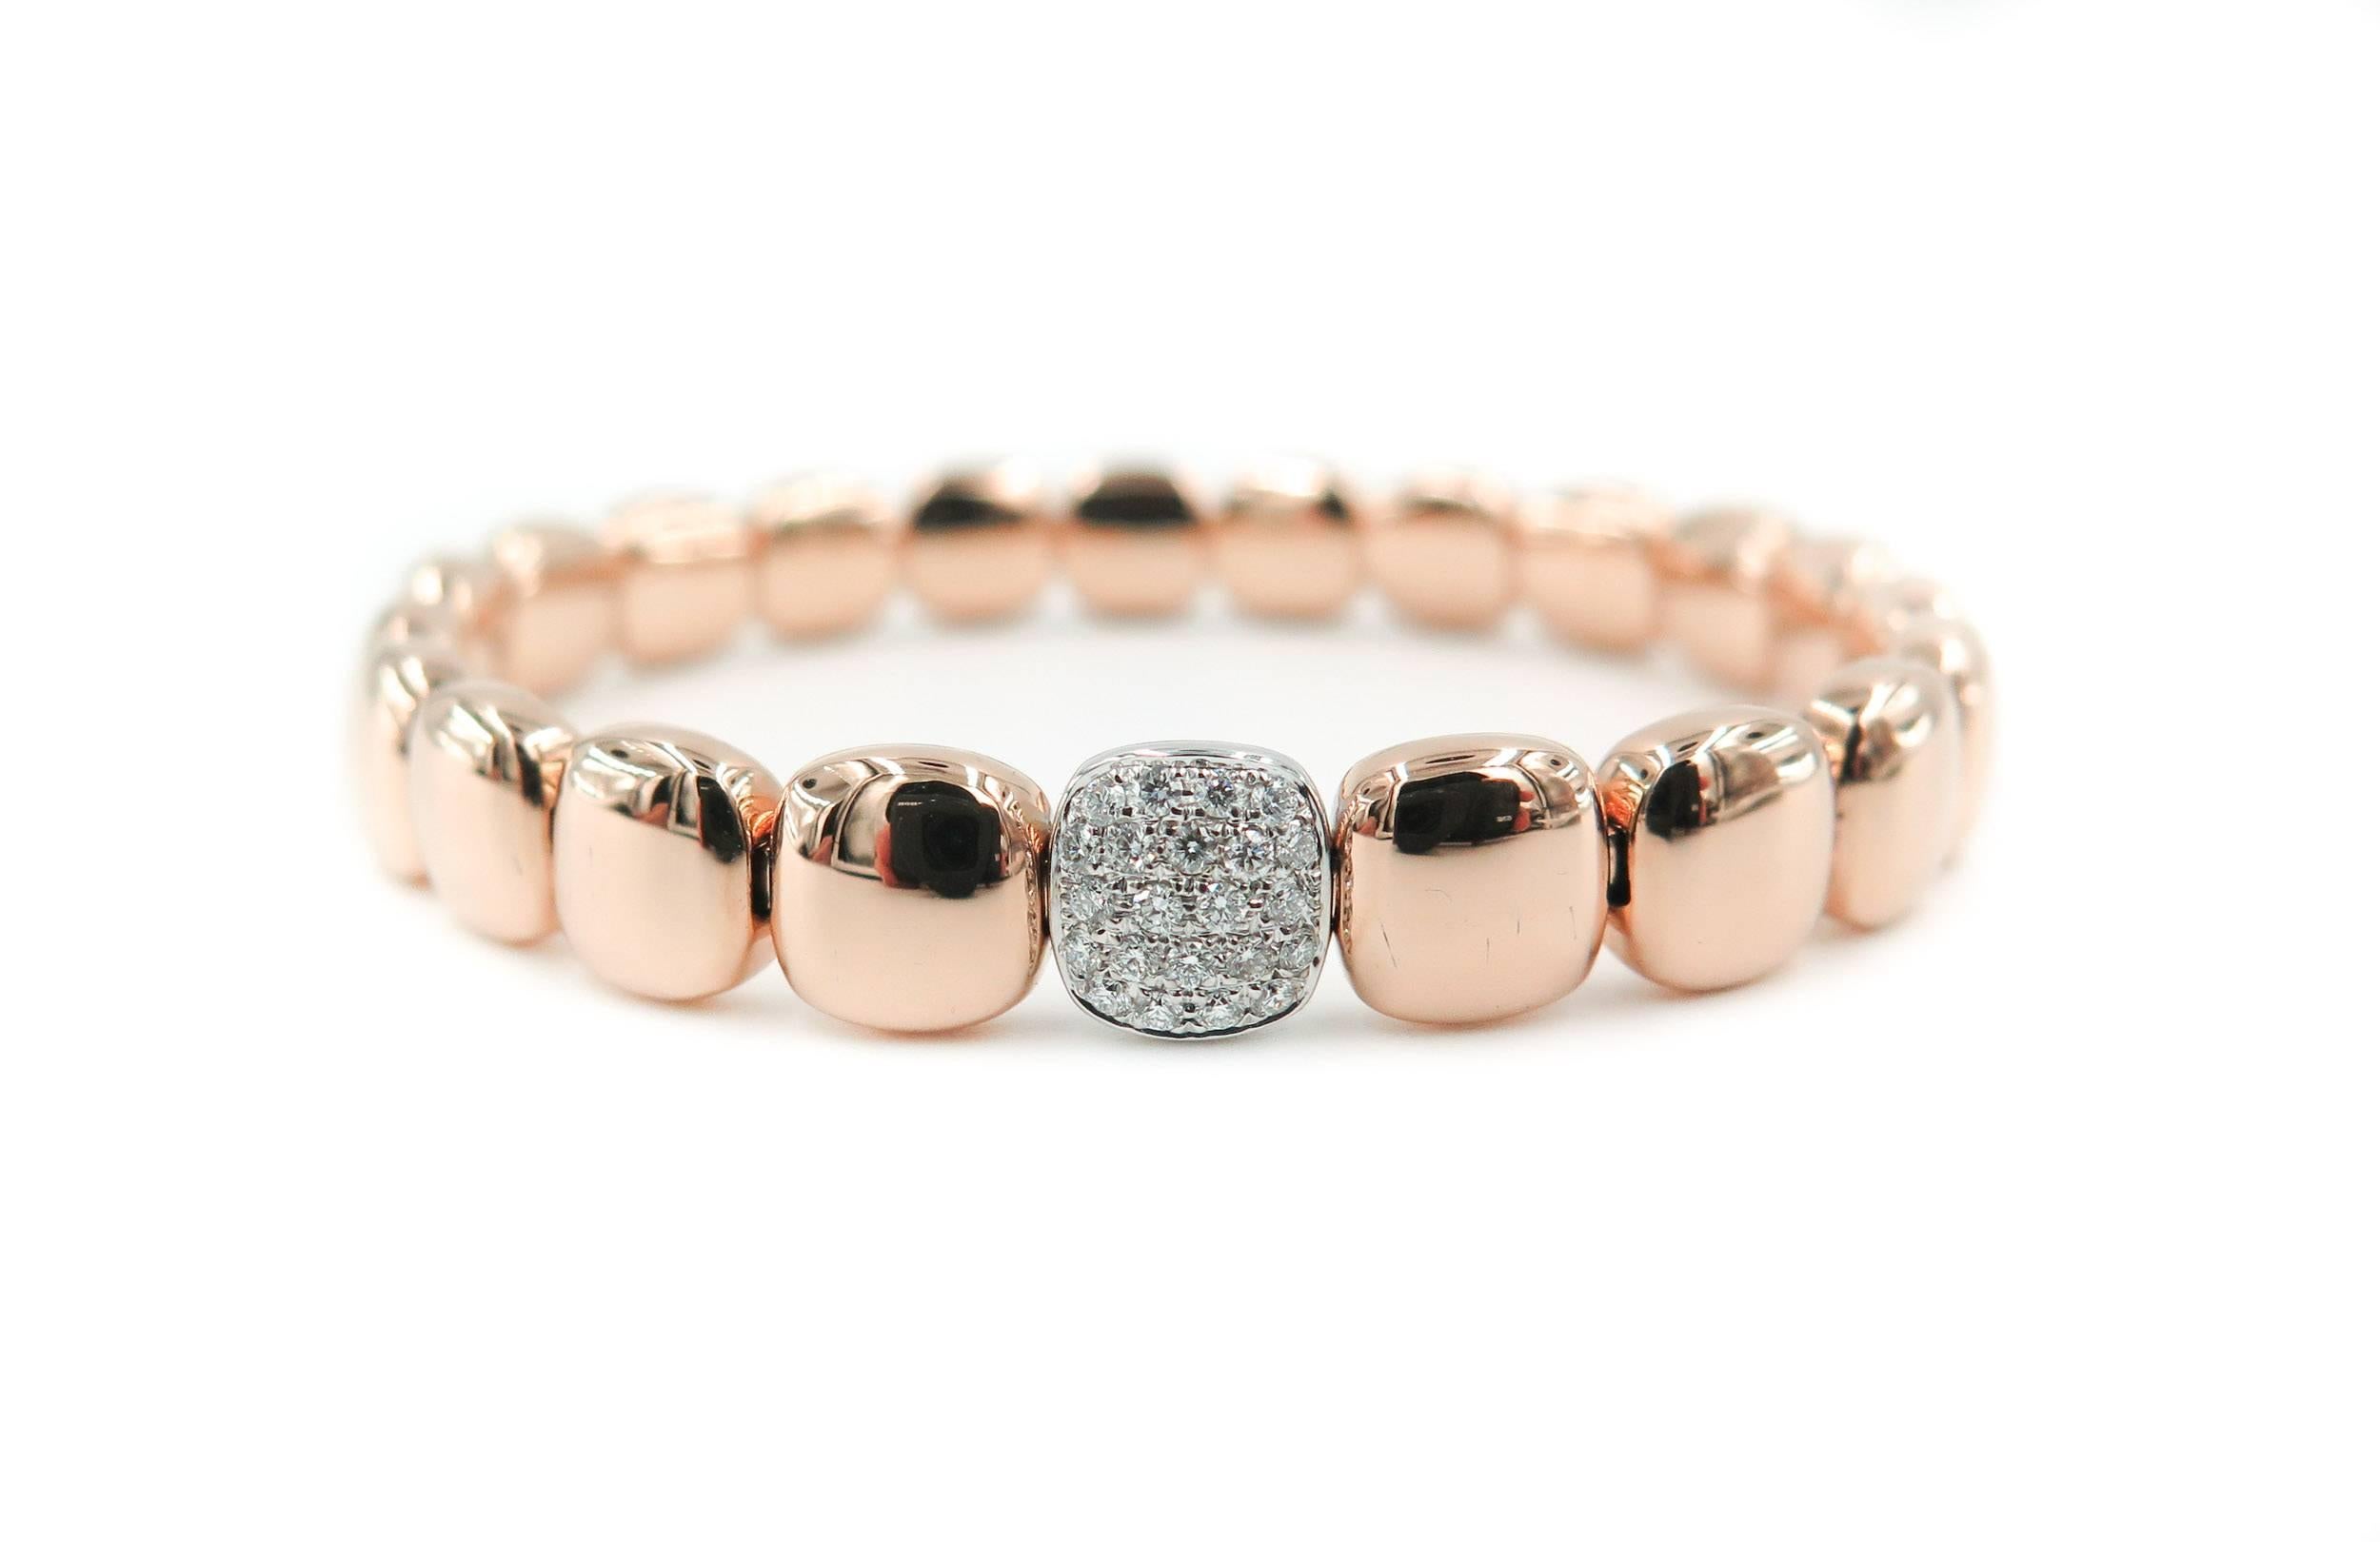 This graceful 18k rose gold cushion shaped beaded bracelet, handcrafted in Italy featuring 20 sparkling round cut white diamonds set in the center bead. Bracelet is constructed with a unique stainless steel coil mechanism that allows the bracelet to